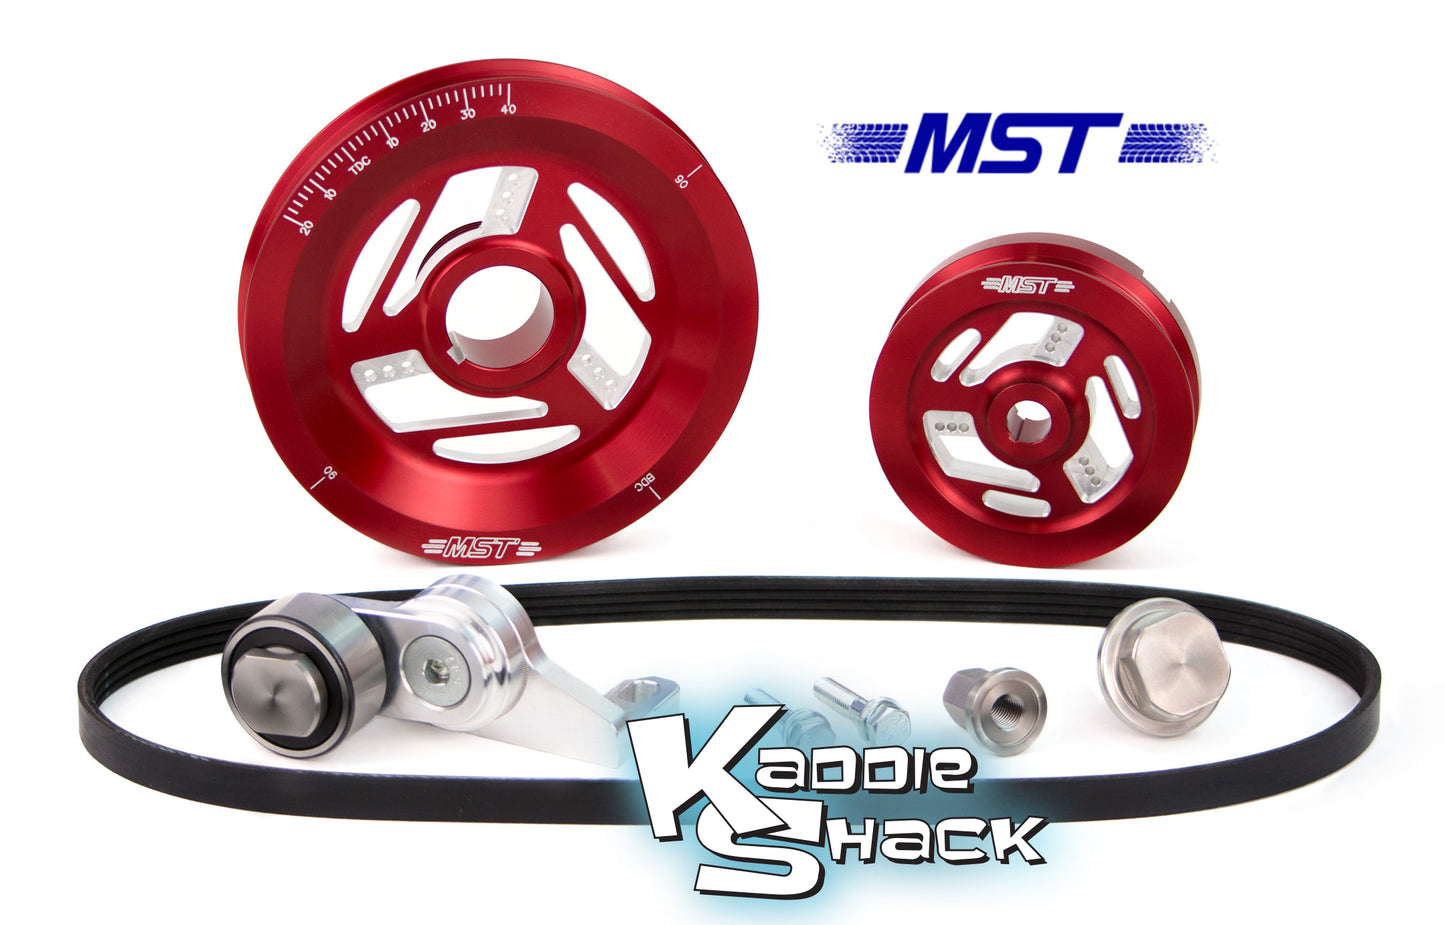 MST Raptor Serpentine Belt Pulley System, Red Anodized